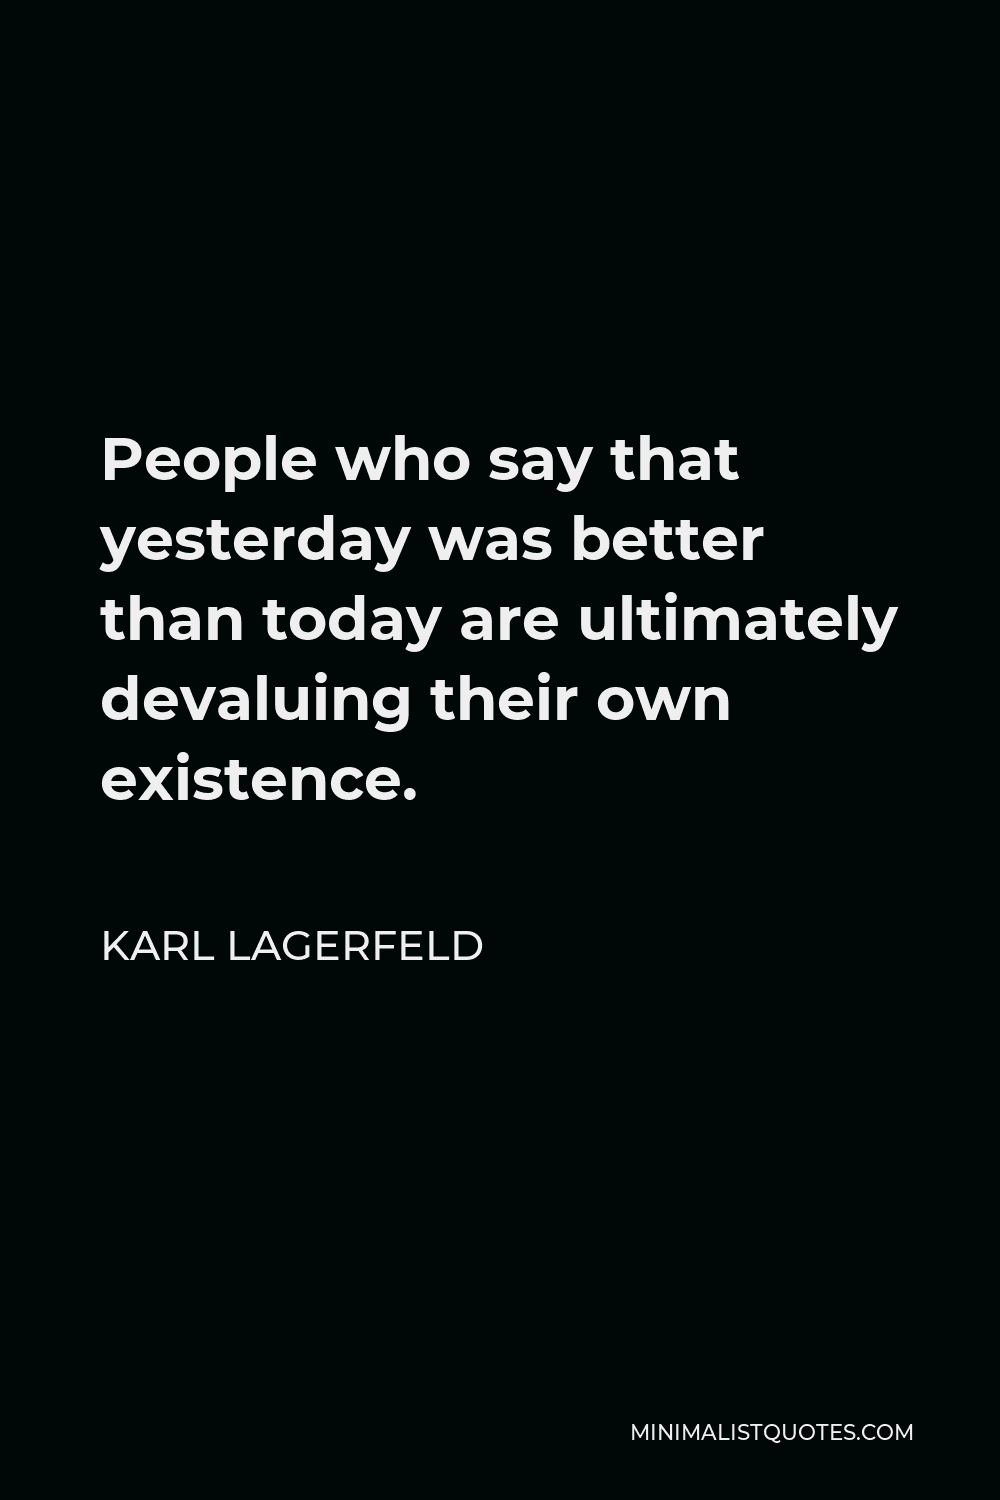 Karl Lagerfeld Quote - People who say that yesterday was better than today are ultimately devaluing their own existence.